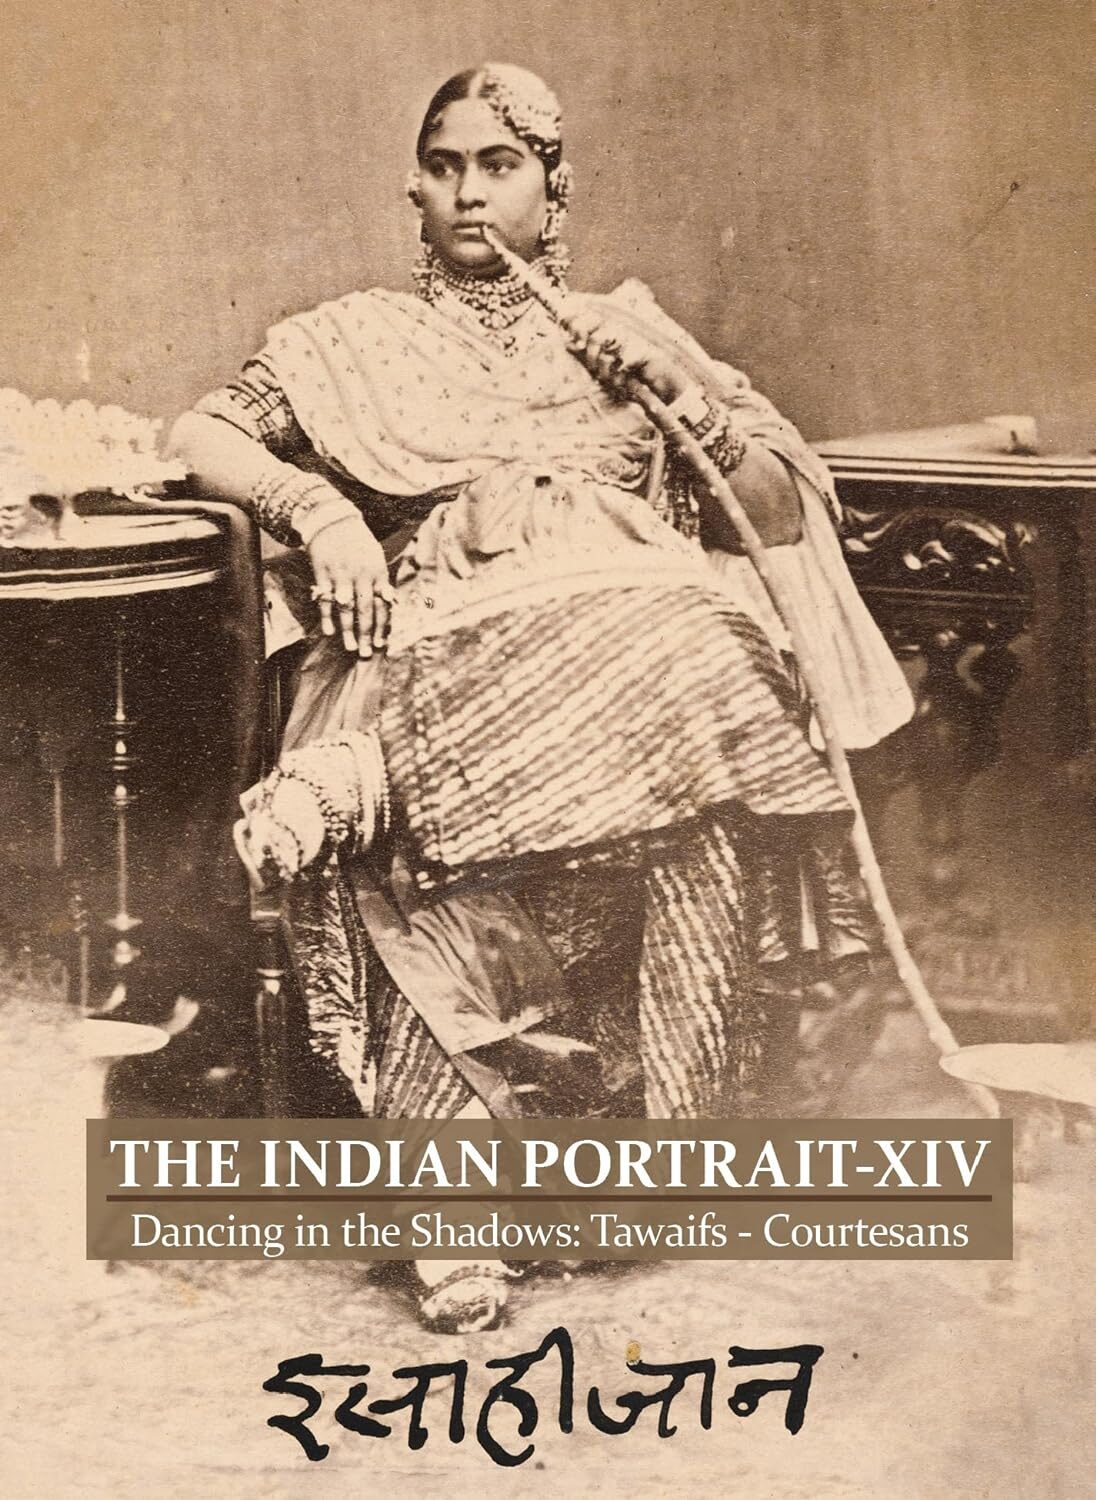 The Indian Portrait - XIV : Dancing in the Shadows: Tawaifs - Courtesans 